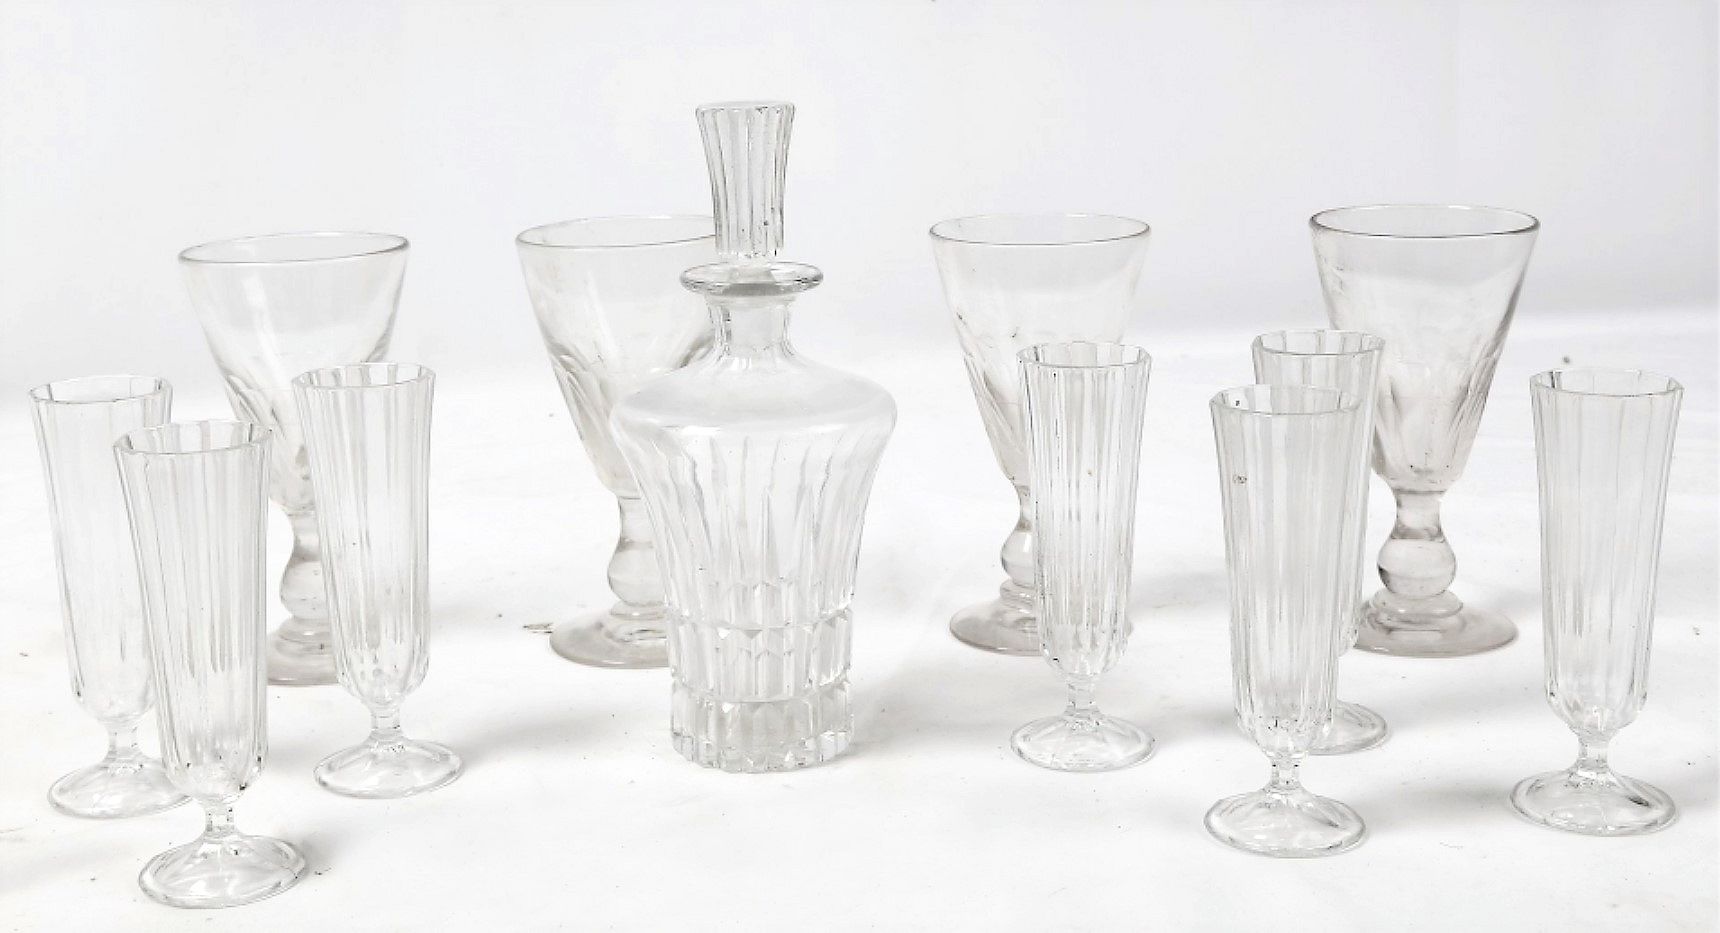 Null Glass set: 7 faceted flutes on foot, 4 water glasses, carafe, (n°177)